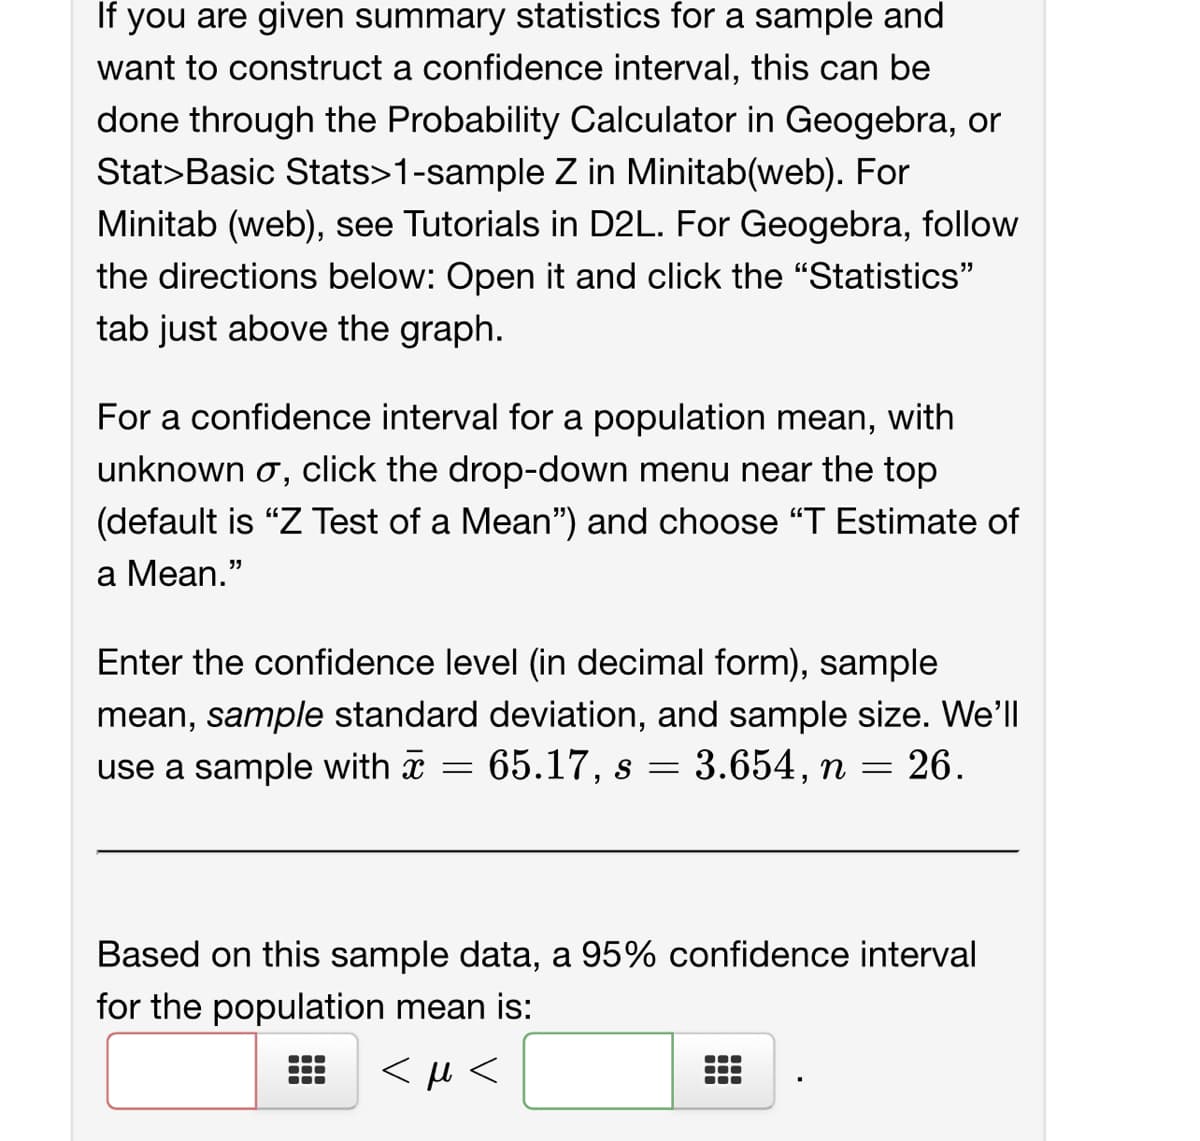 If you are given summary statistics for a sample and
want to construct a confidence interval, this can be
done through the Probability Calculator in Geogebra, or
Stat>Basic Stats>1-sample Z in Minitab(web). For
Minitab (web), see Tutorials in D2L. For Geogebra, follow
the directions below: Open it and click the "Statistics"
tab just above the graph.
For a confidence interval for a population mean, with
unknown σ, click the drop-down menu near the top
(default is "Z Test of a Mean") and choose "T Estimate of
a Mean."
Enter the confidence level (in decimal form), sample
mean, sample standard deviation, and sample size. We'll
use a sample with
65.17, s = 3.654, n = 26.
=
Based on this sample data, a 95% confidence interval
for the population mean is:
<μ<